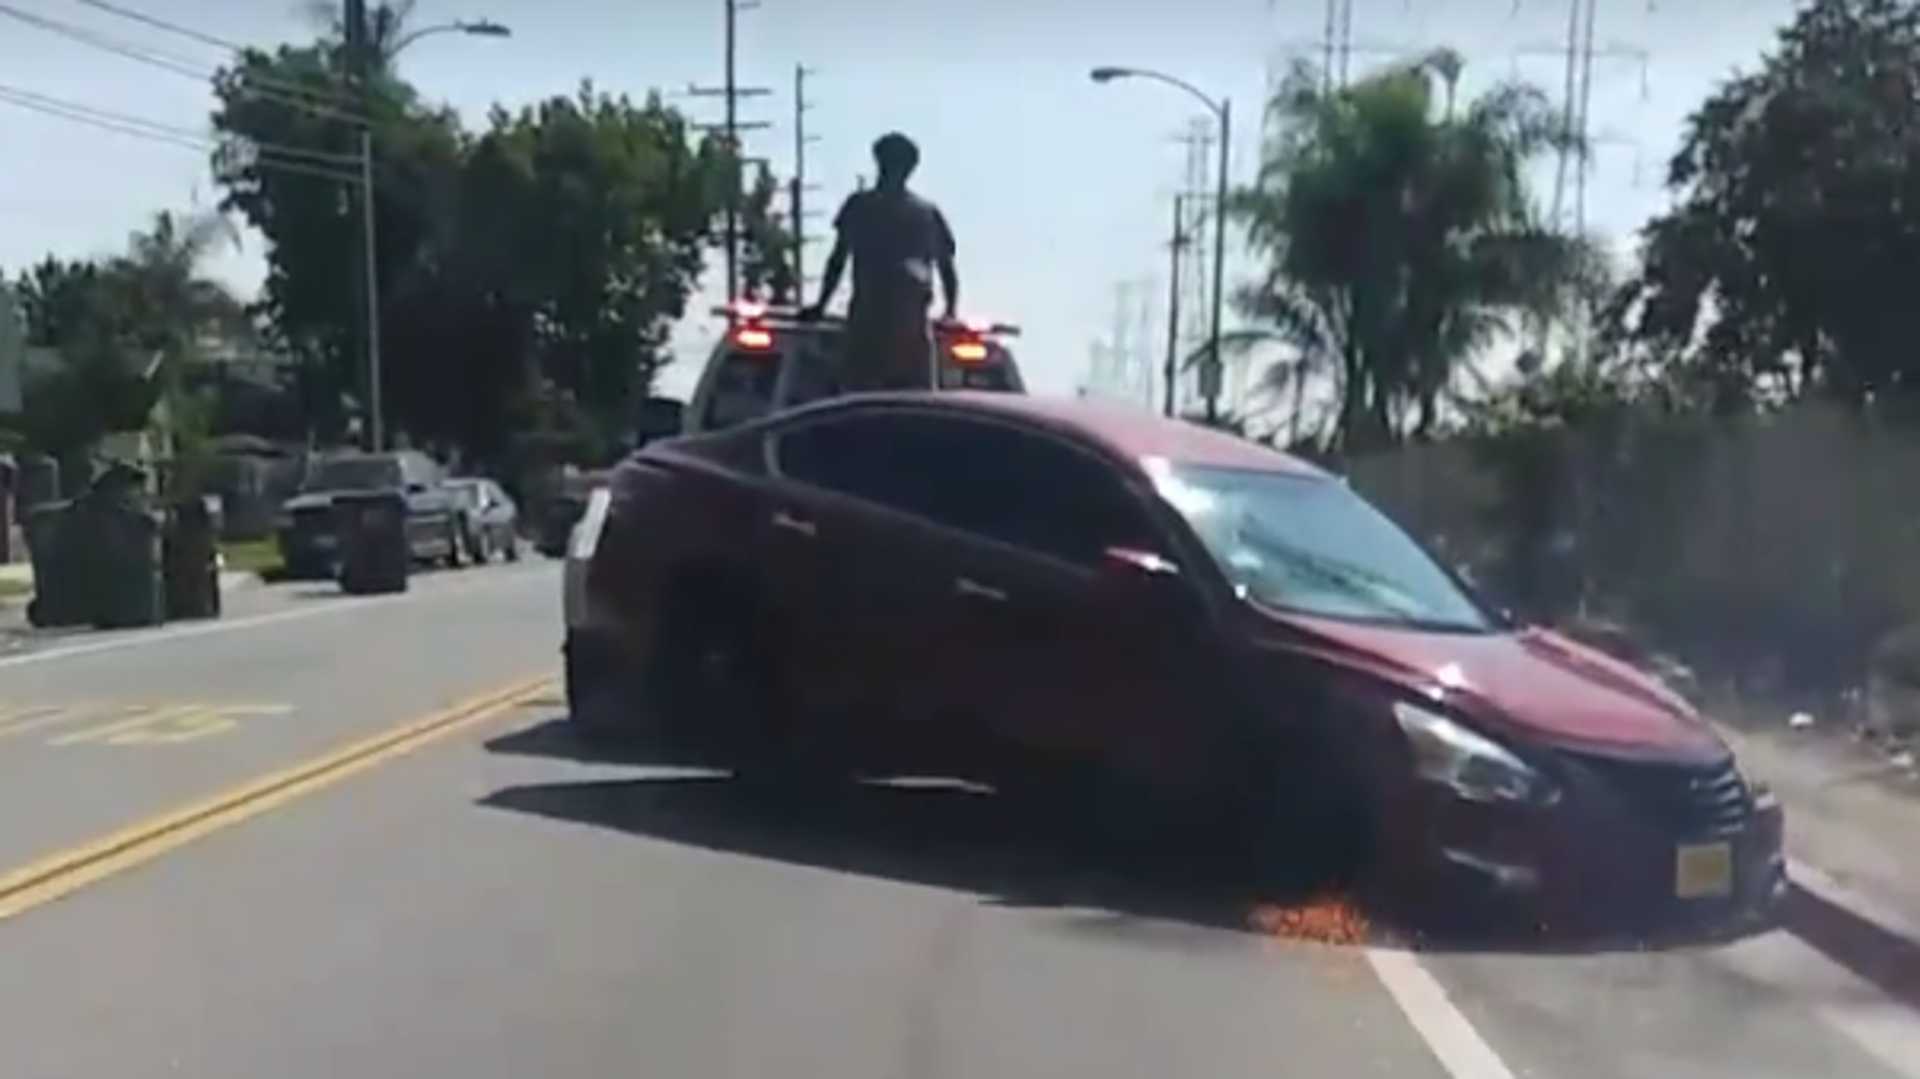 Wild Video Shows Tow Truck Dragging Repo’d Nissan Altima While Owner Tries to Free It